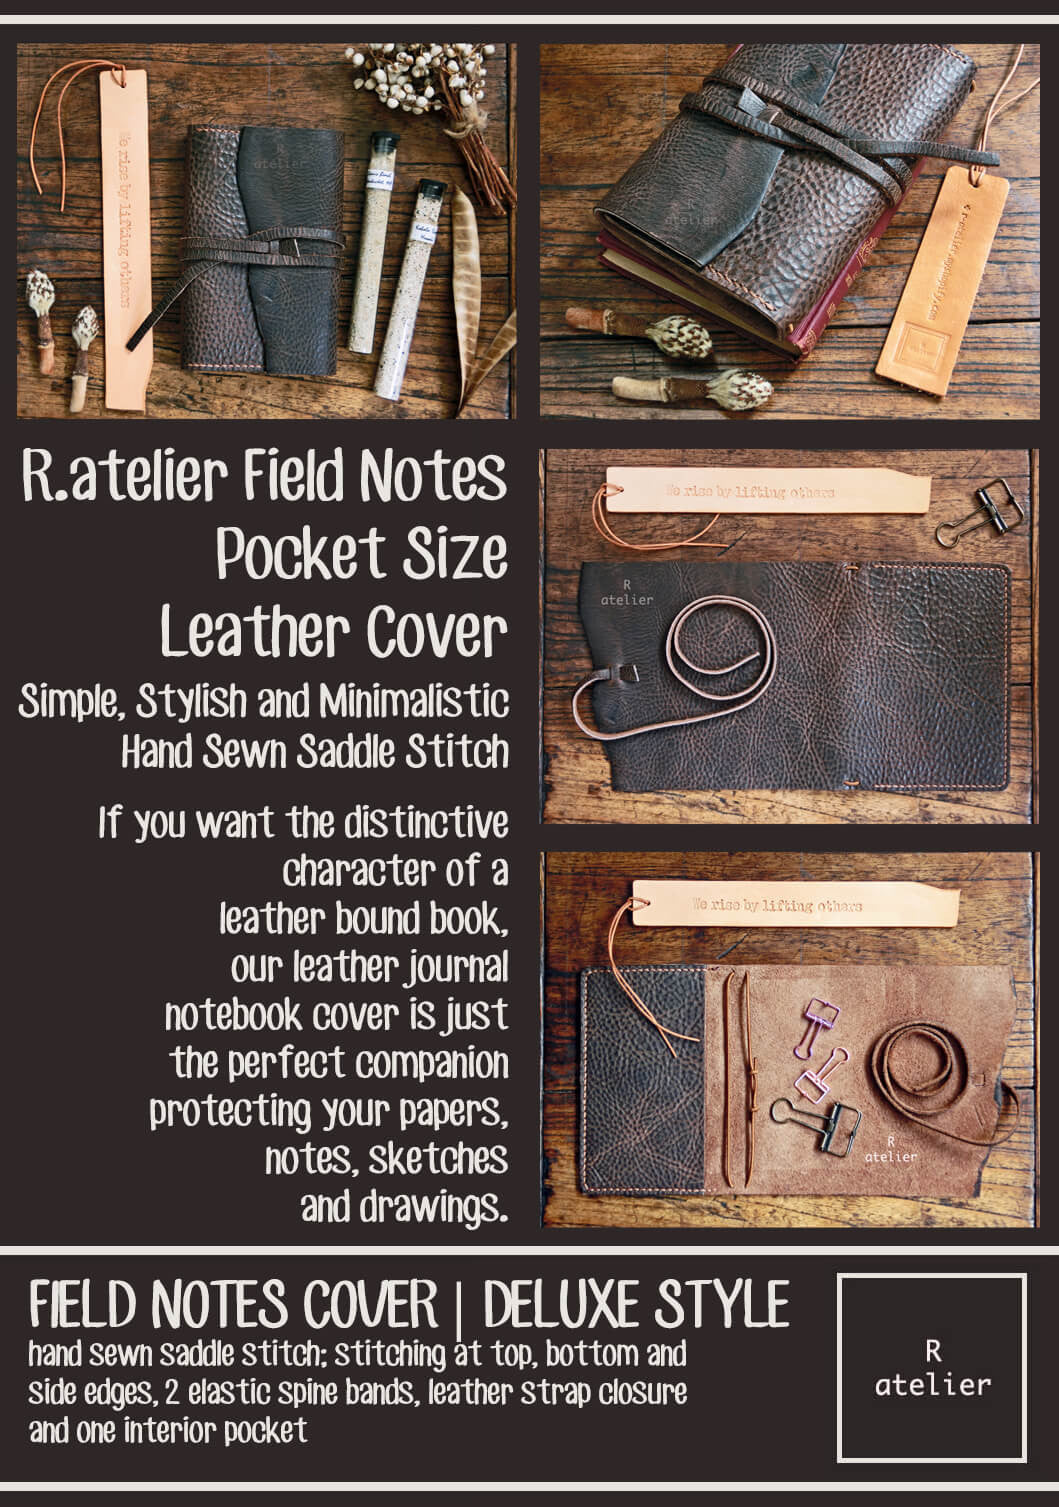 Field Notes | Leather Journal Cover | *One of A Kind* Bistre Brown | Pocket Size